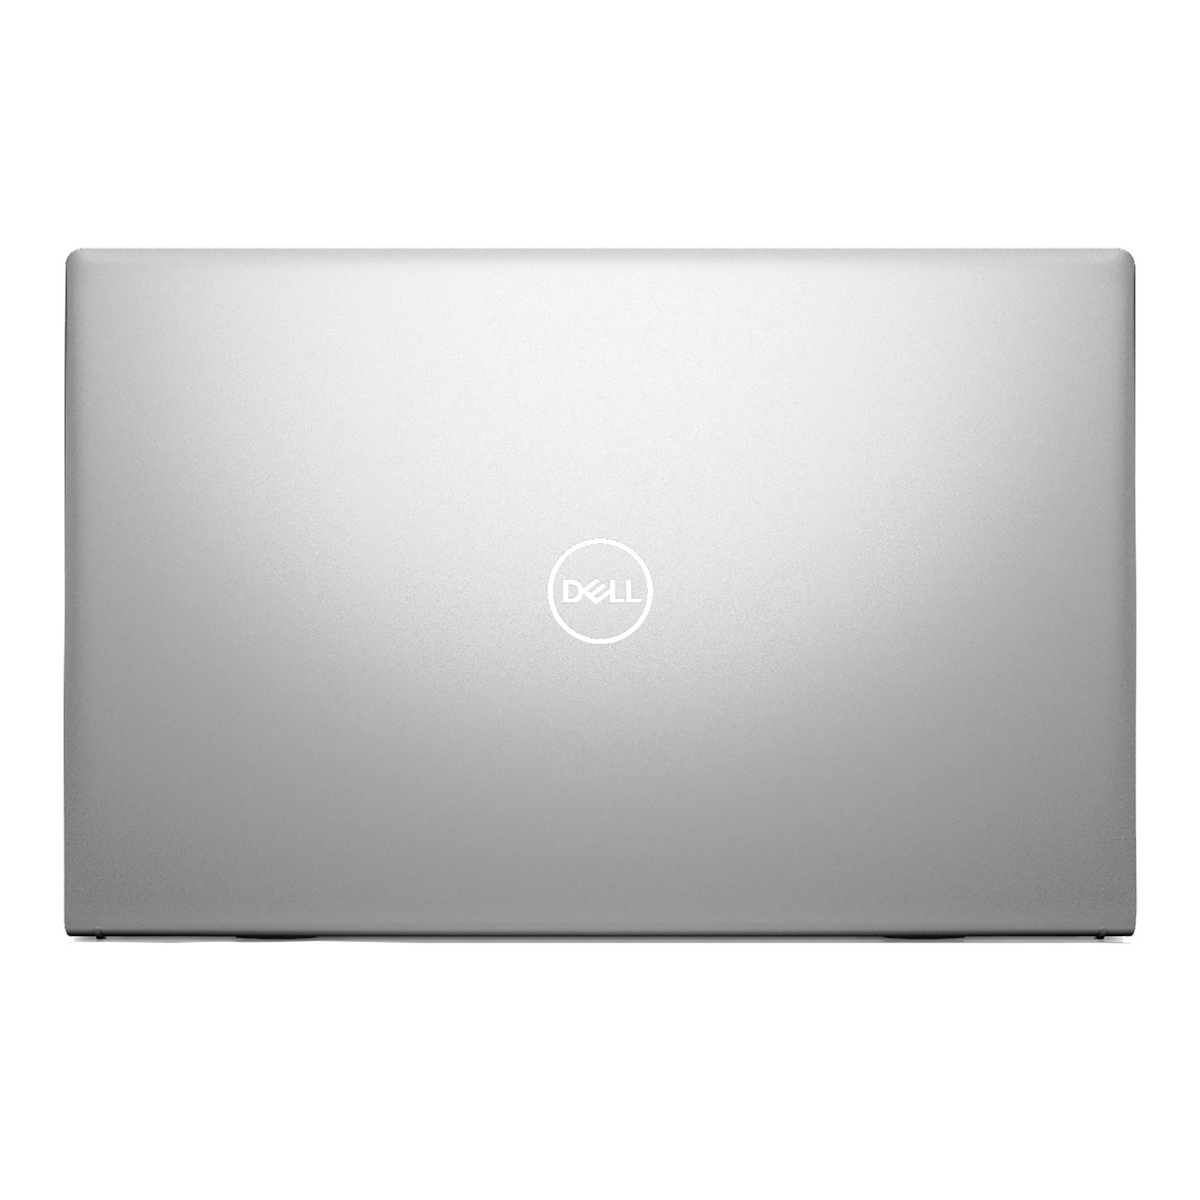 Dell Notebook, 15.6 Inches, FHD Display, Intel Core i7-11390H, Intel Iris Xe Graphics, 8 GB RAM, 512 GB SSD, Silver, INS15-5510-4110-SL